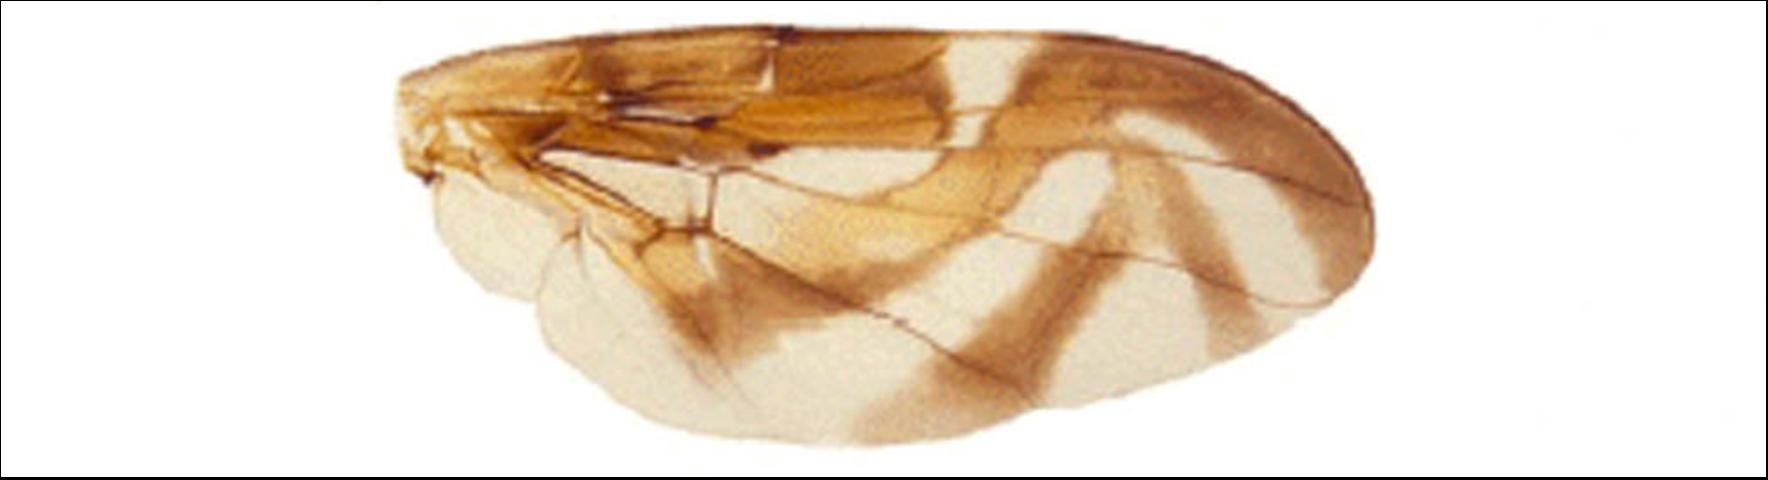 Figure 4. Wing of the Caribbean fruit fly, A. suspensa.